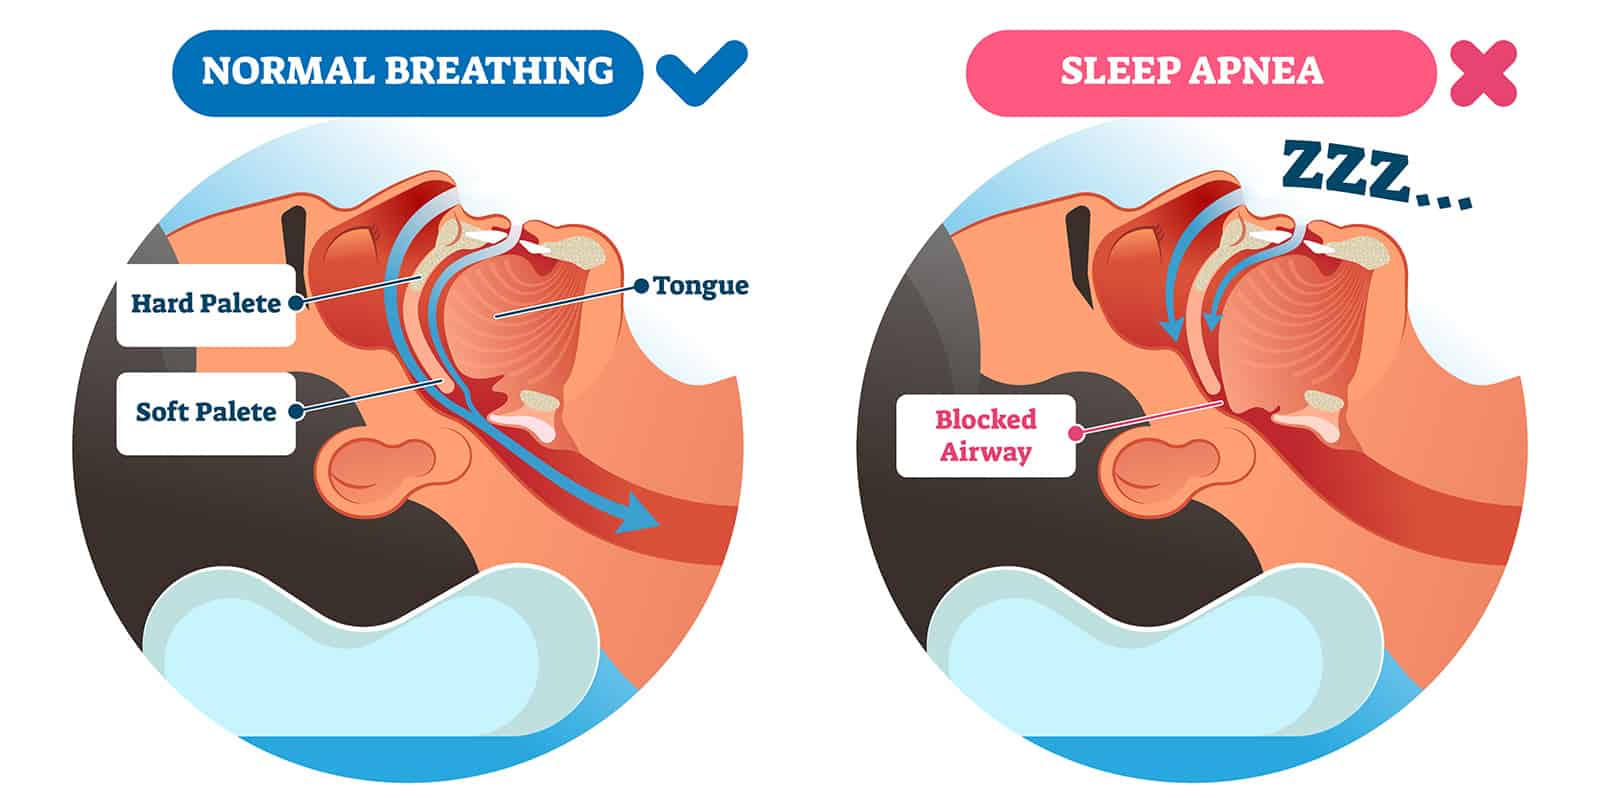 A medical illustration comparing normal breathing and a closed airway